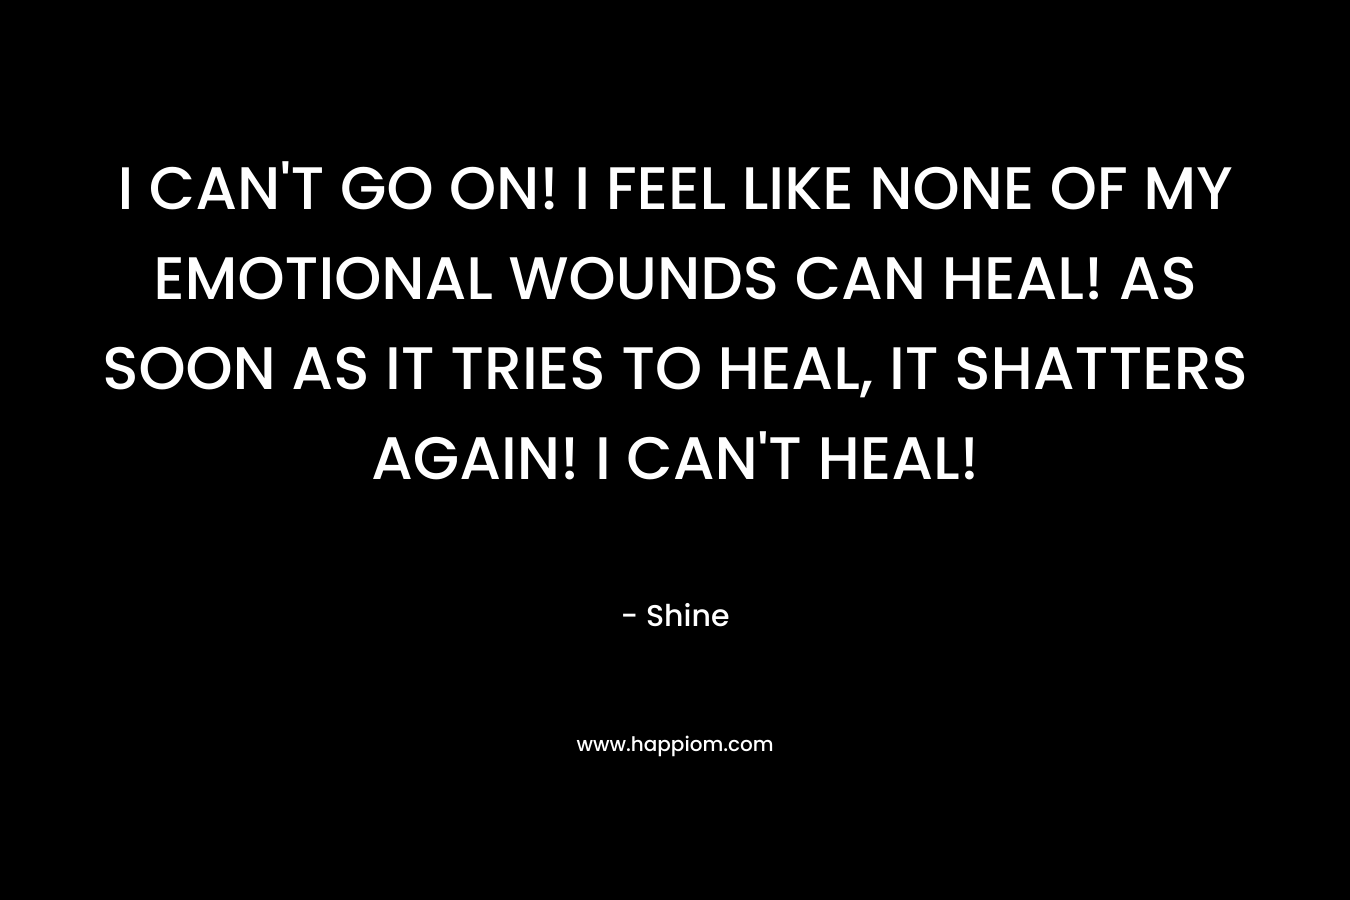 I CAN'T GO ON! I FEEL LIKE NONE OF MY EMOTIONAL WOUNDS CAN HEAL! AS SOON AS IT TRIES TO HEAL, IT SHATTERS AGAIN! I CAN'T HEAL!